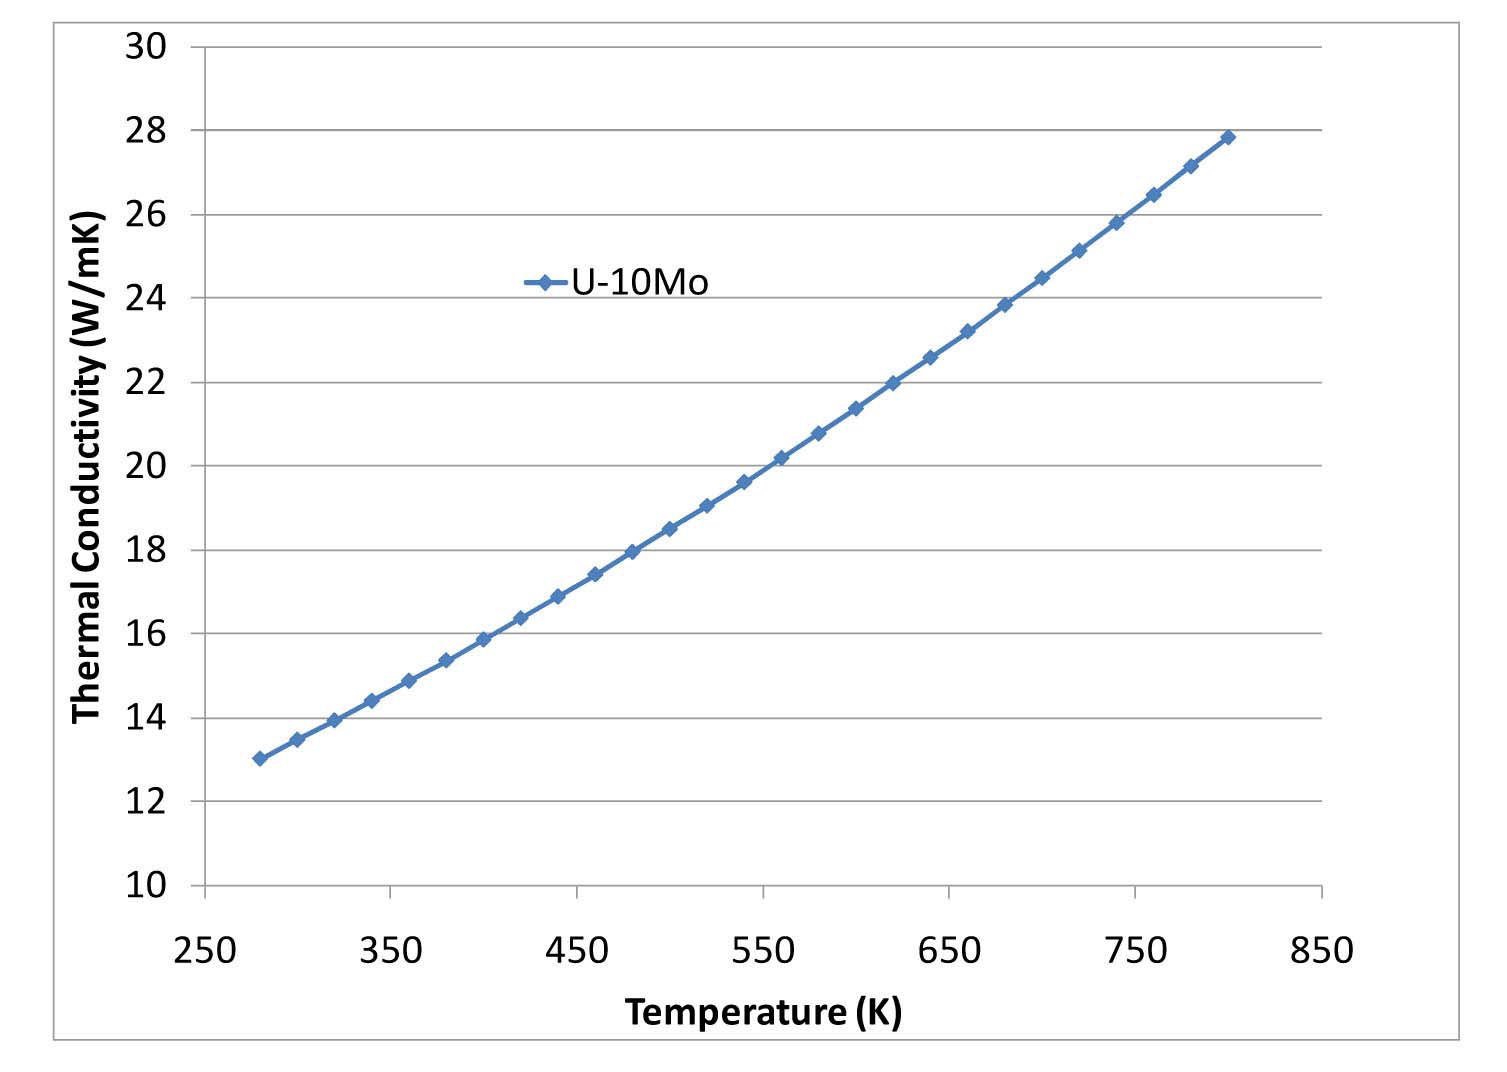 Thermal Conductivity of U-10 Fuel Particles